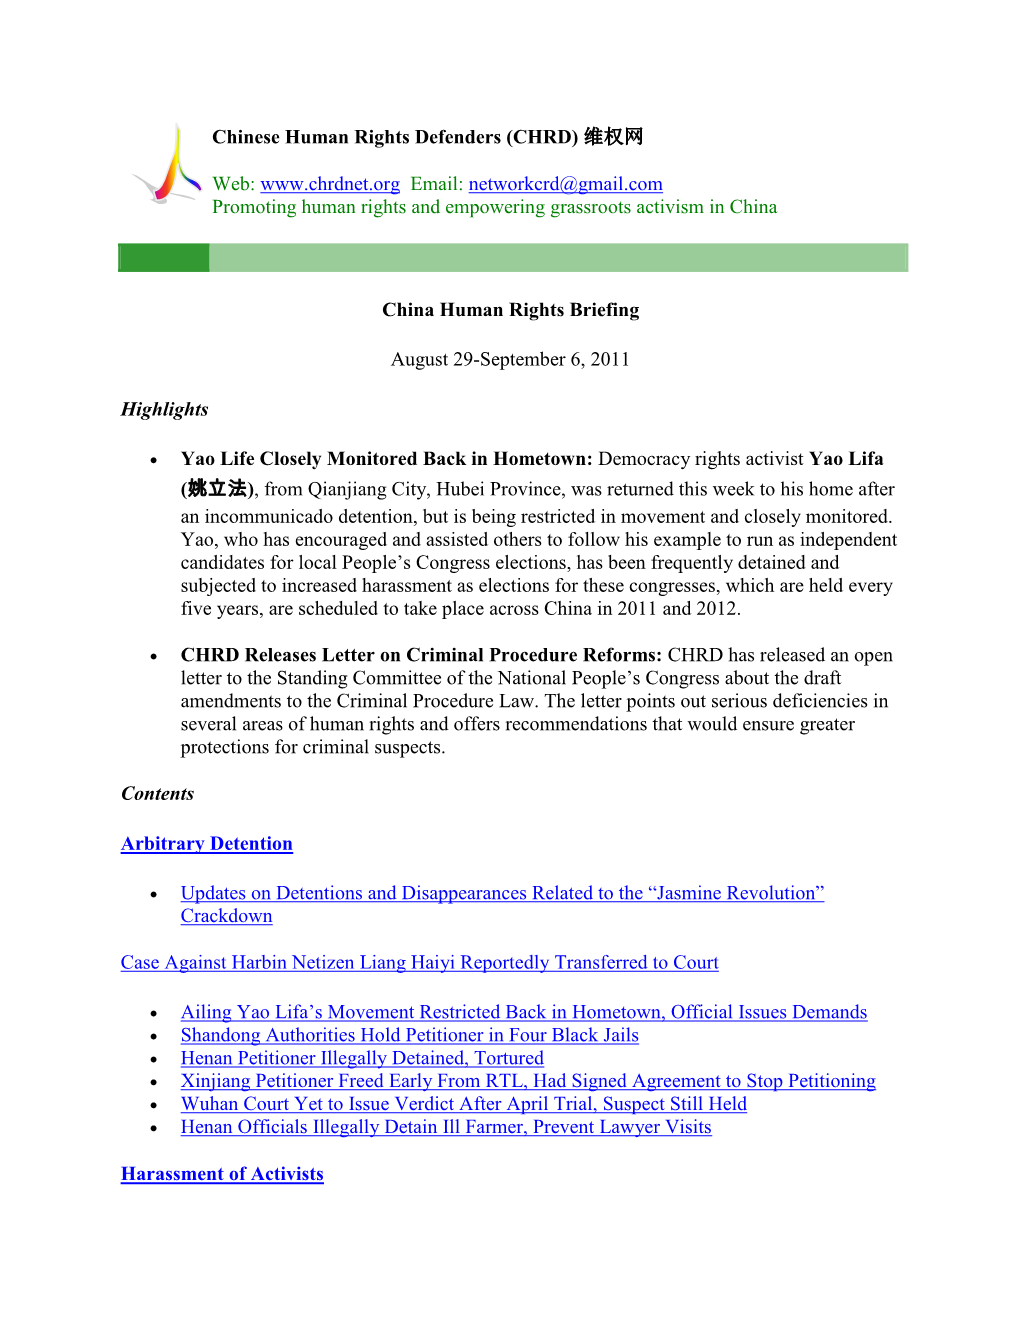 Chinese Human Rights Defenders (CHRD) 维权网 Web: Www